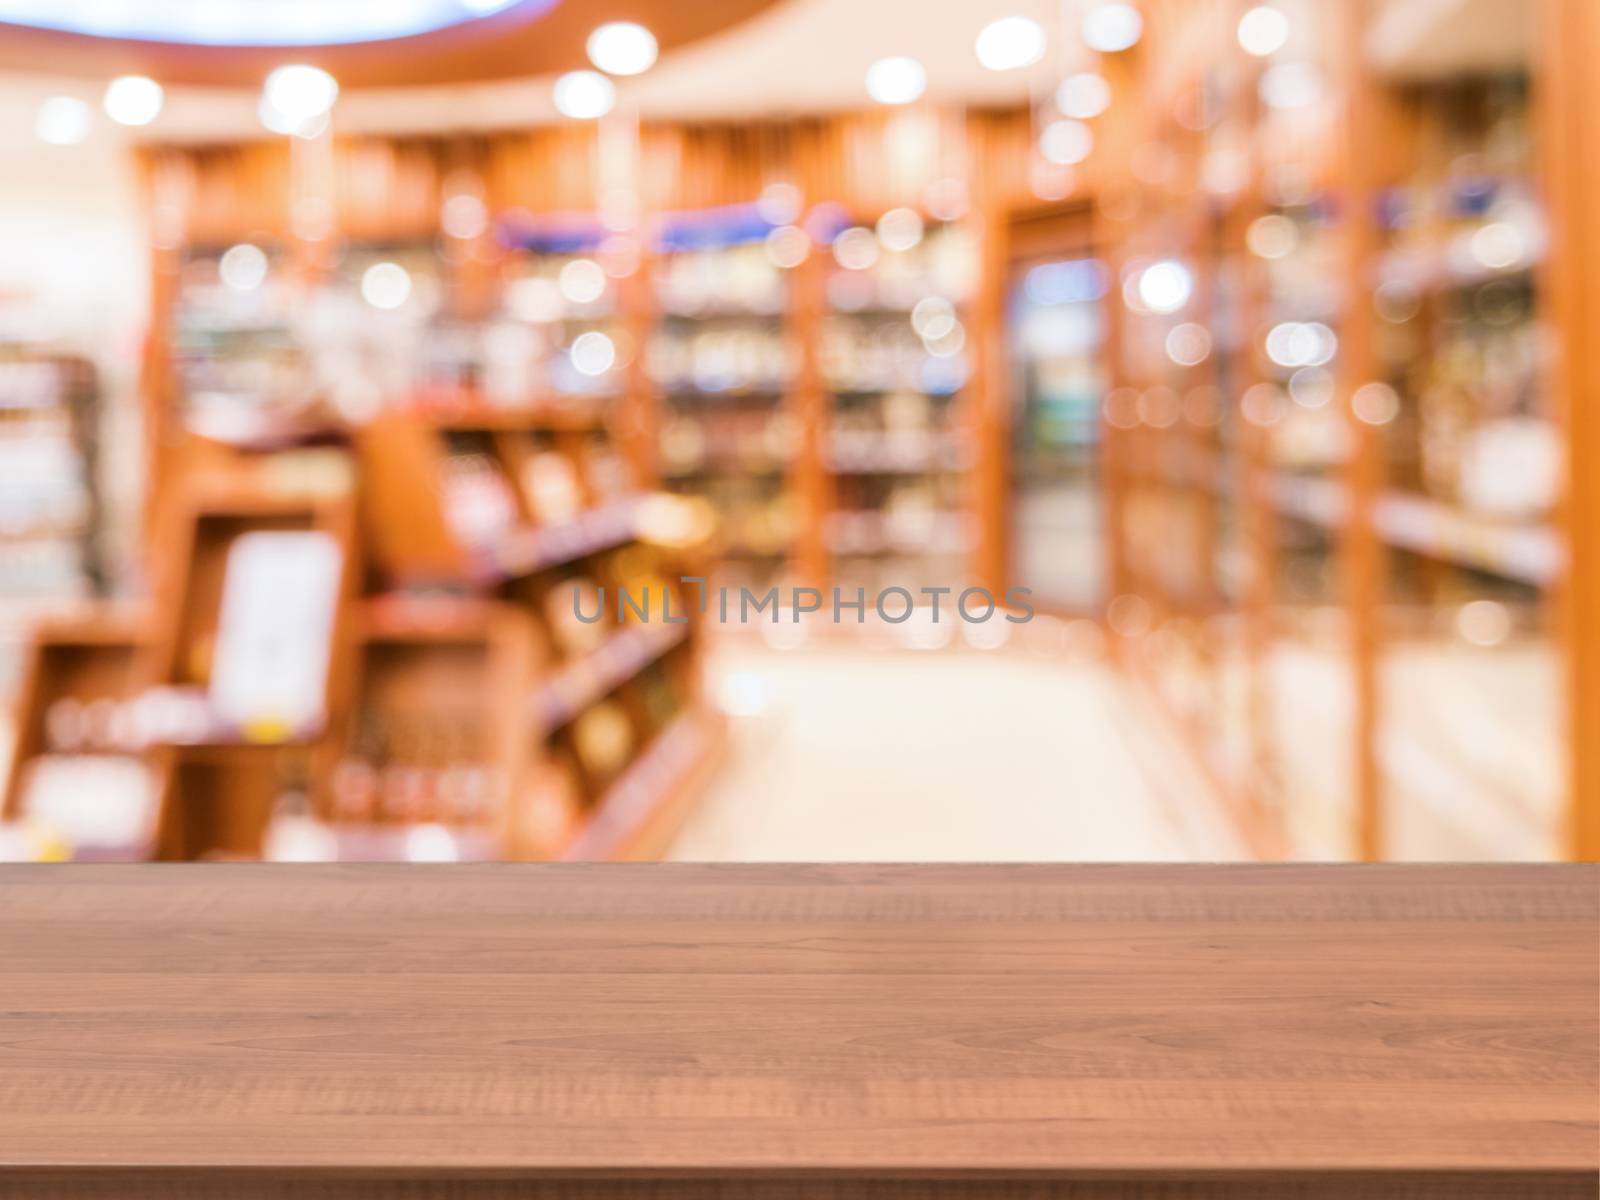 Wooden board empty table in front of blurred background. Perspective dark wood over blur in department of alcoholic drinks in supermarket - Mock up for display or montage your products